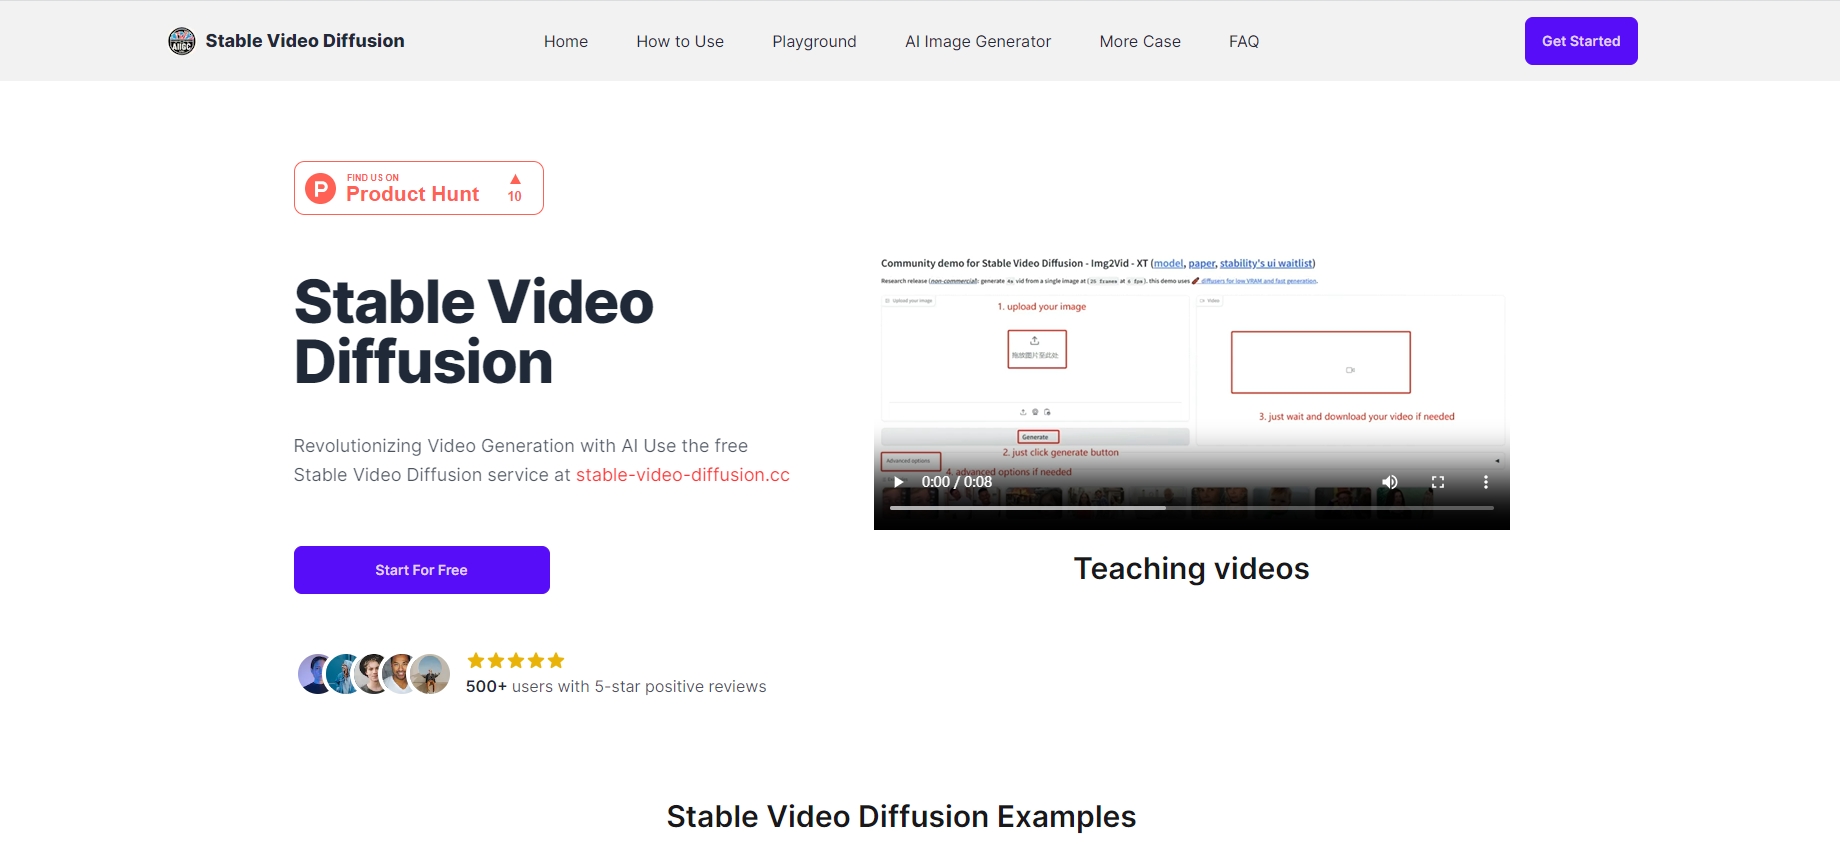 Stable-Video-Diffusion.cc homepage